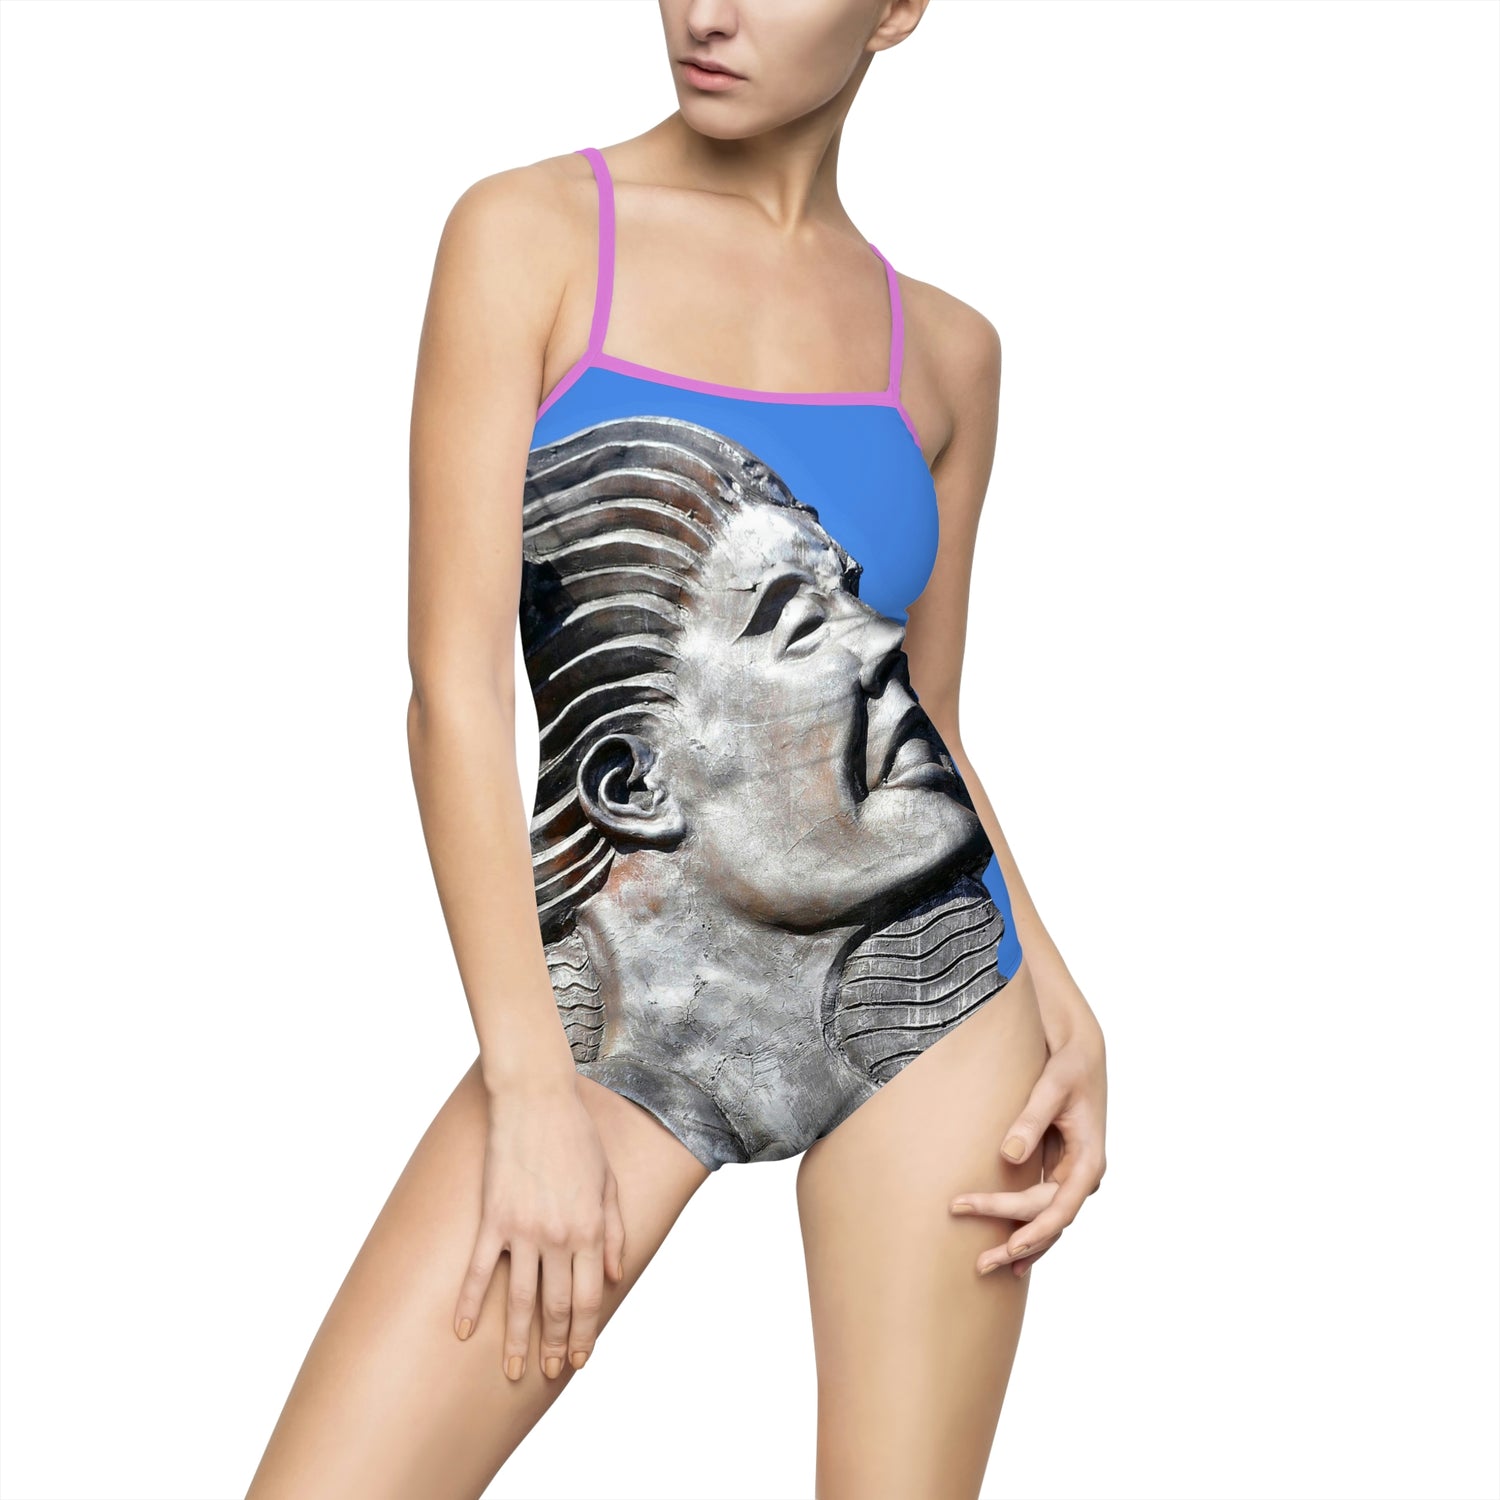 Nymph Beauty - Women's One-Piece Swimsuit - Fry1Productions